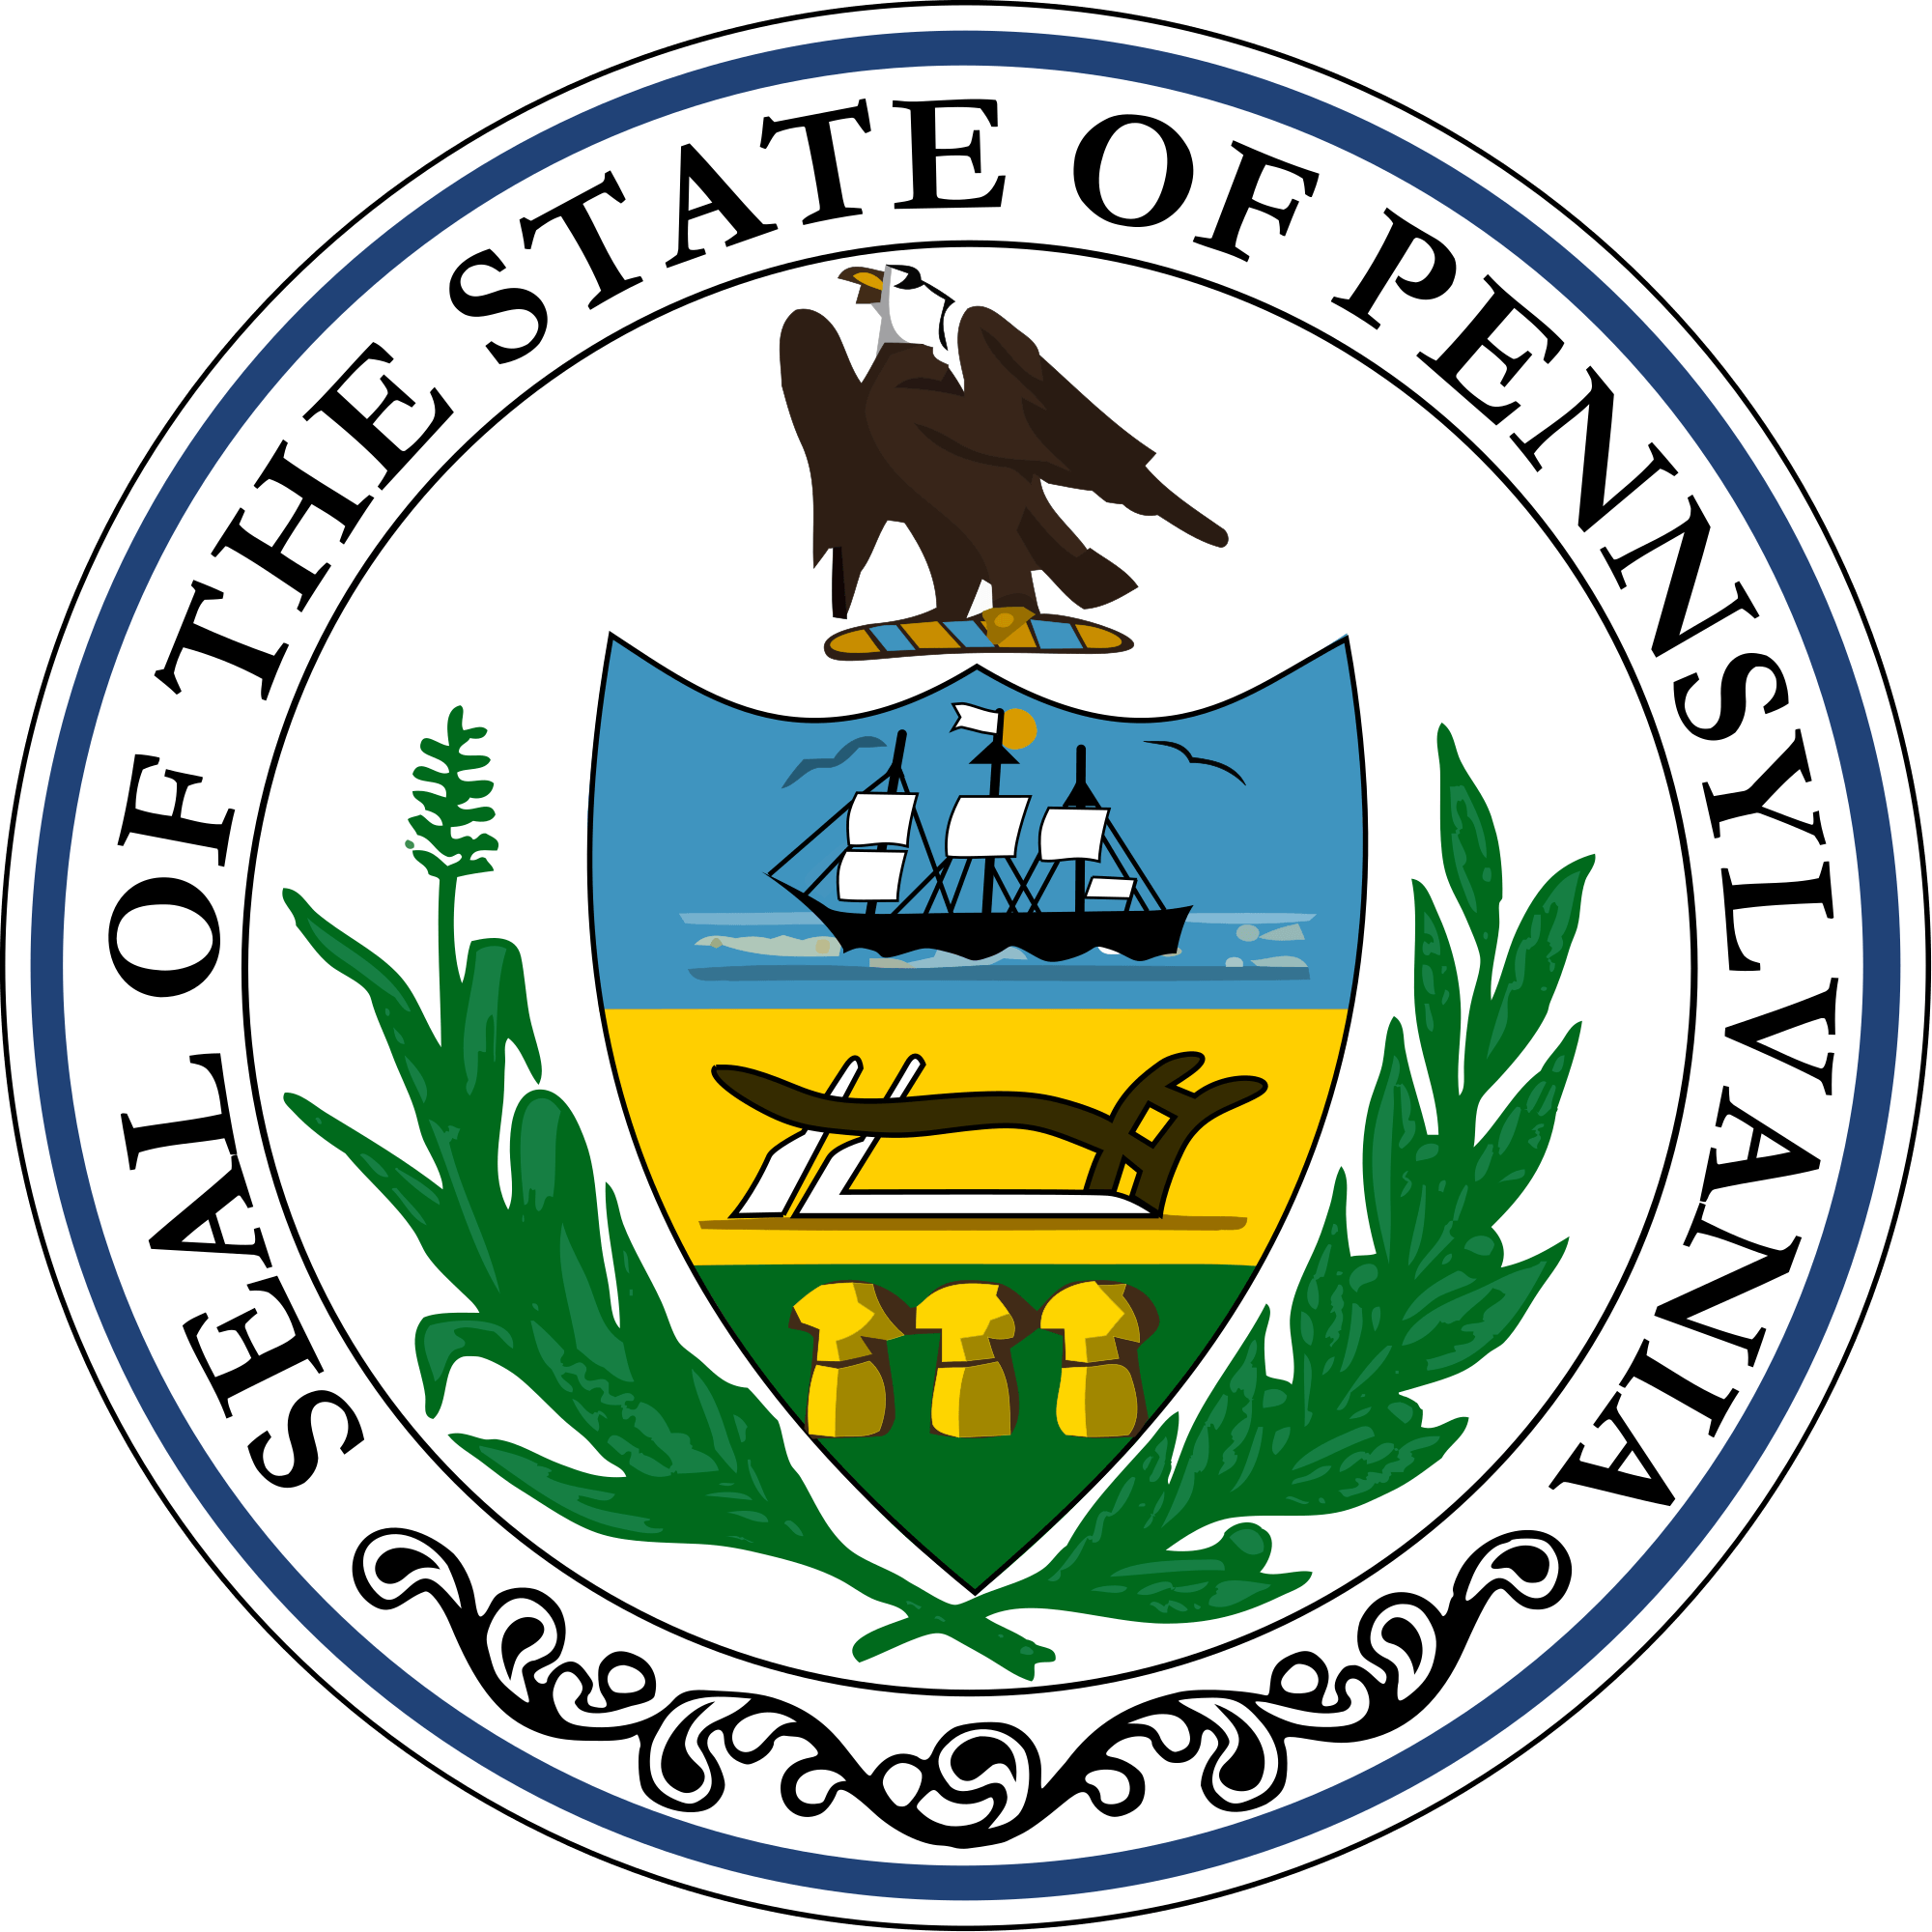 Seal of the State of Pennsylvania